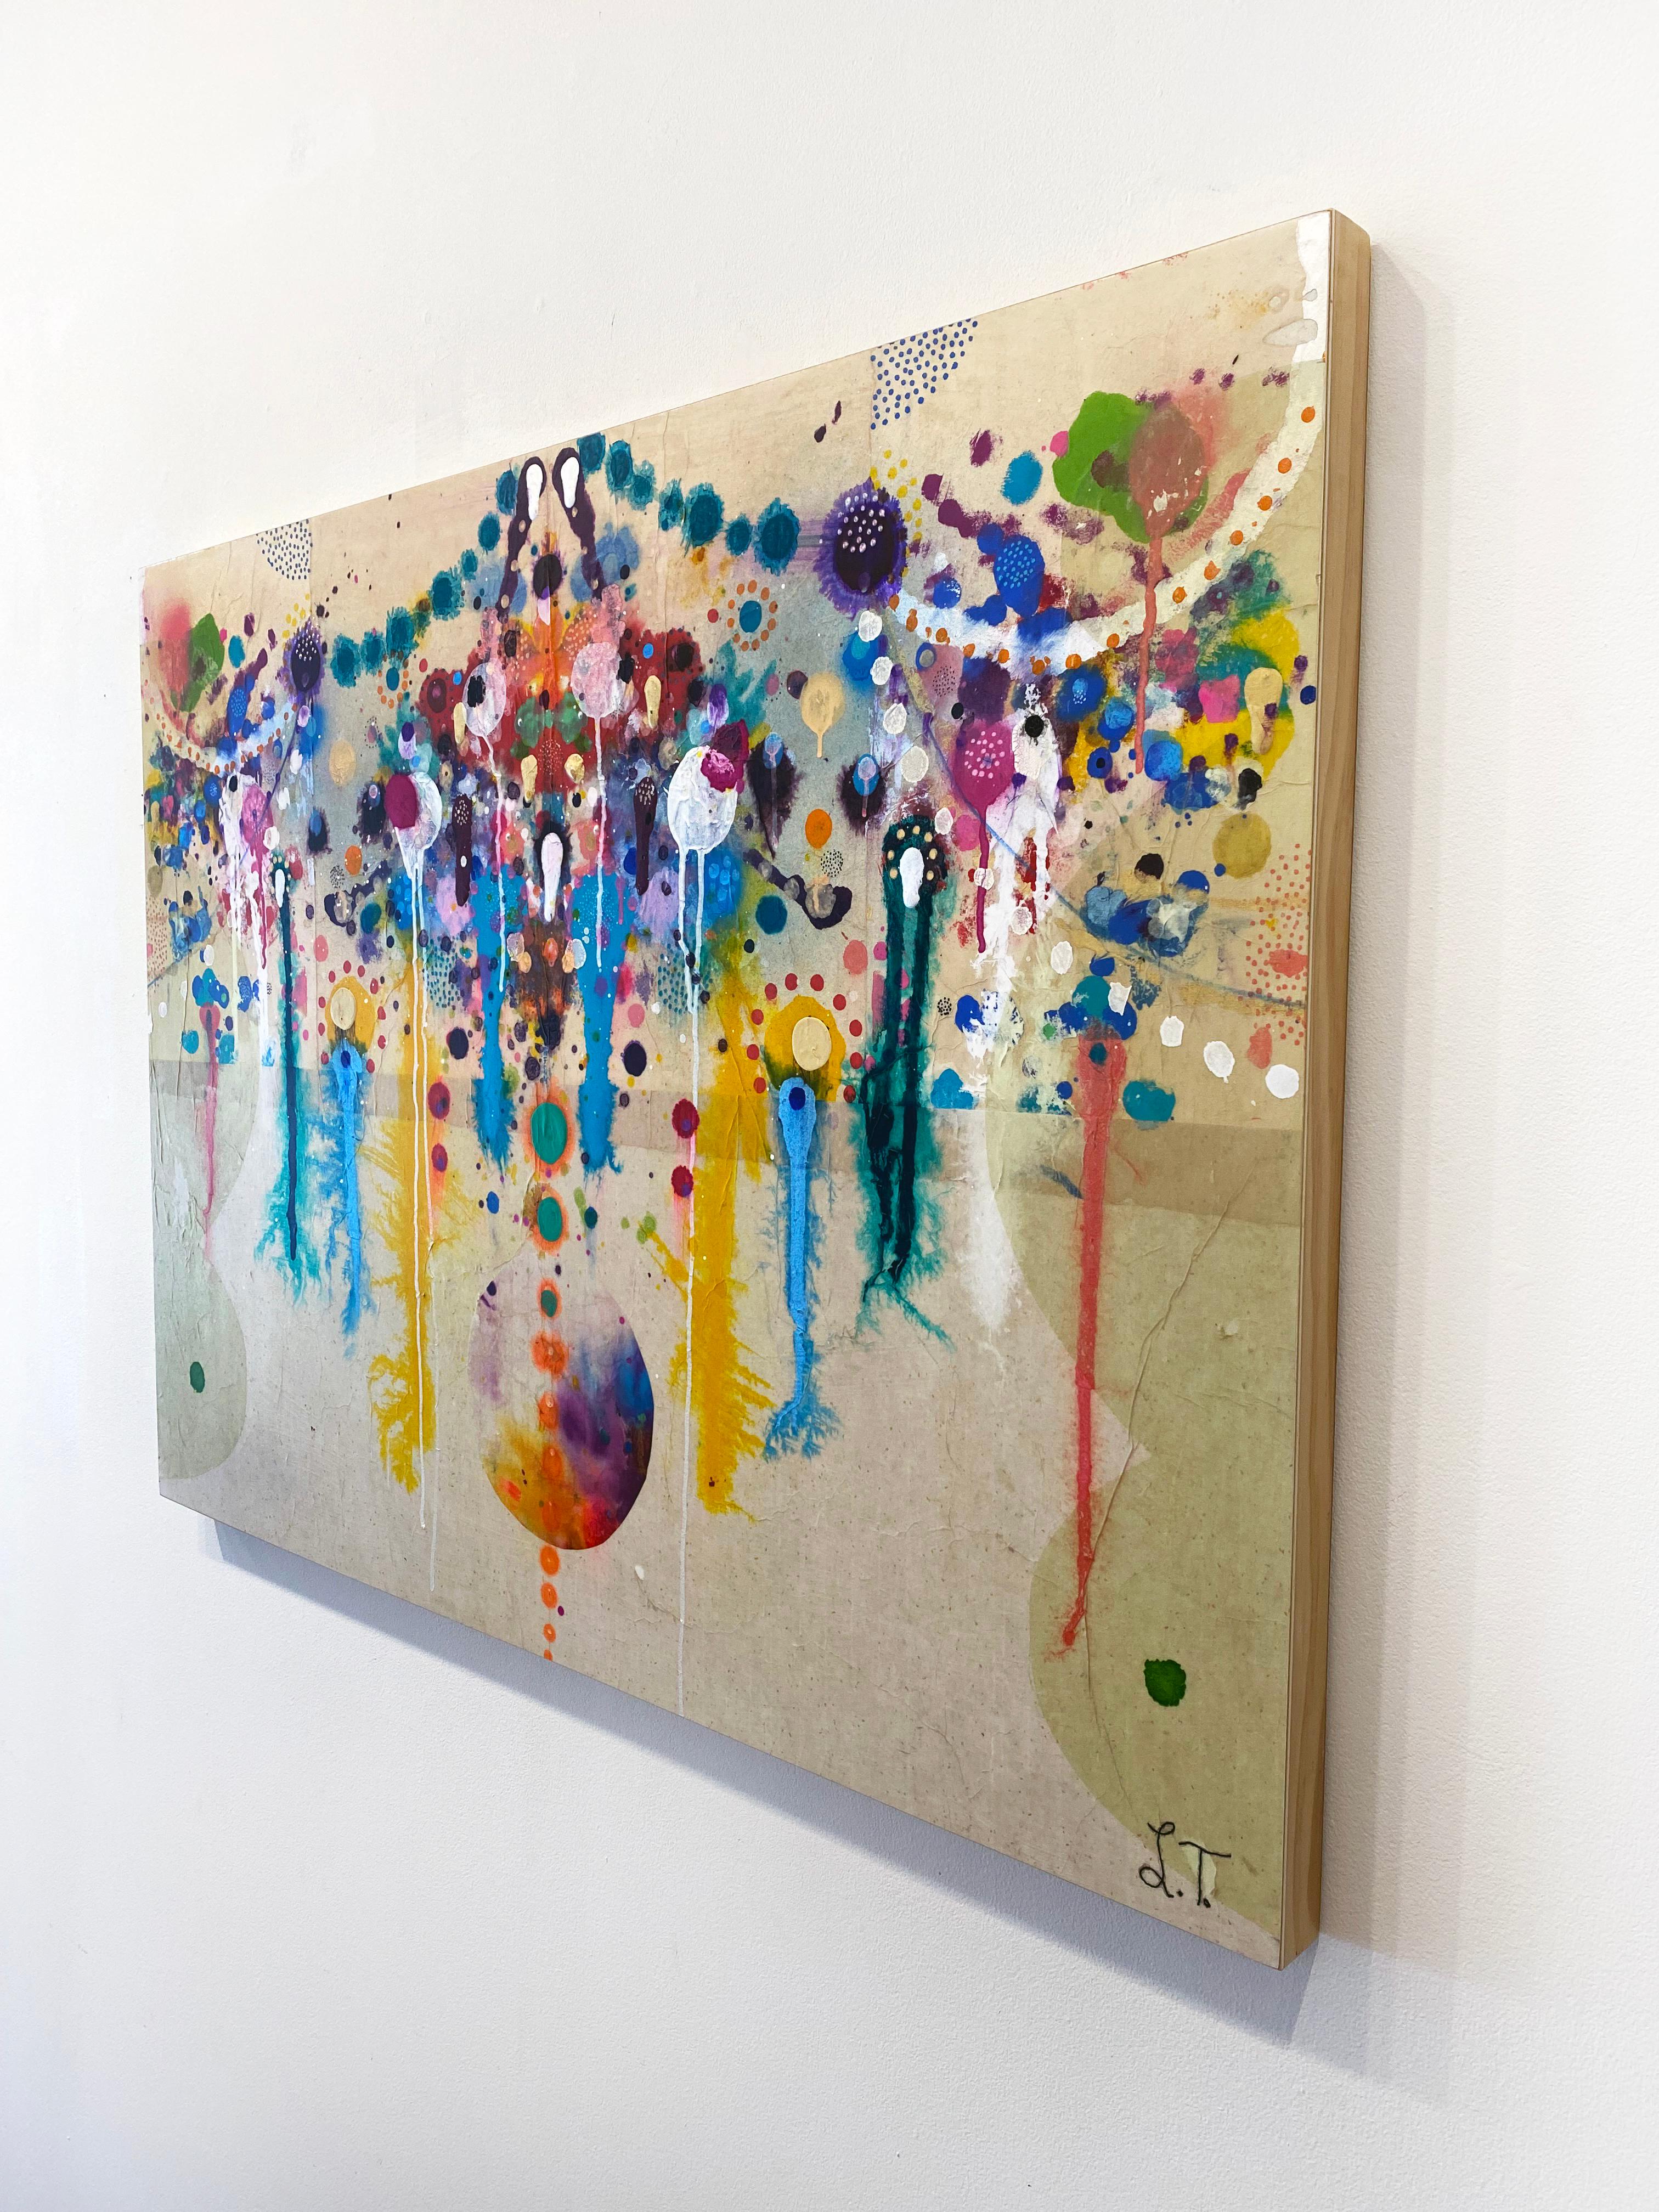 Abstract, Colorful Mixed Media Painting by Liz Tran, 'Mirror 45' For Sale 2